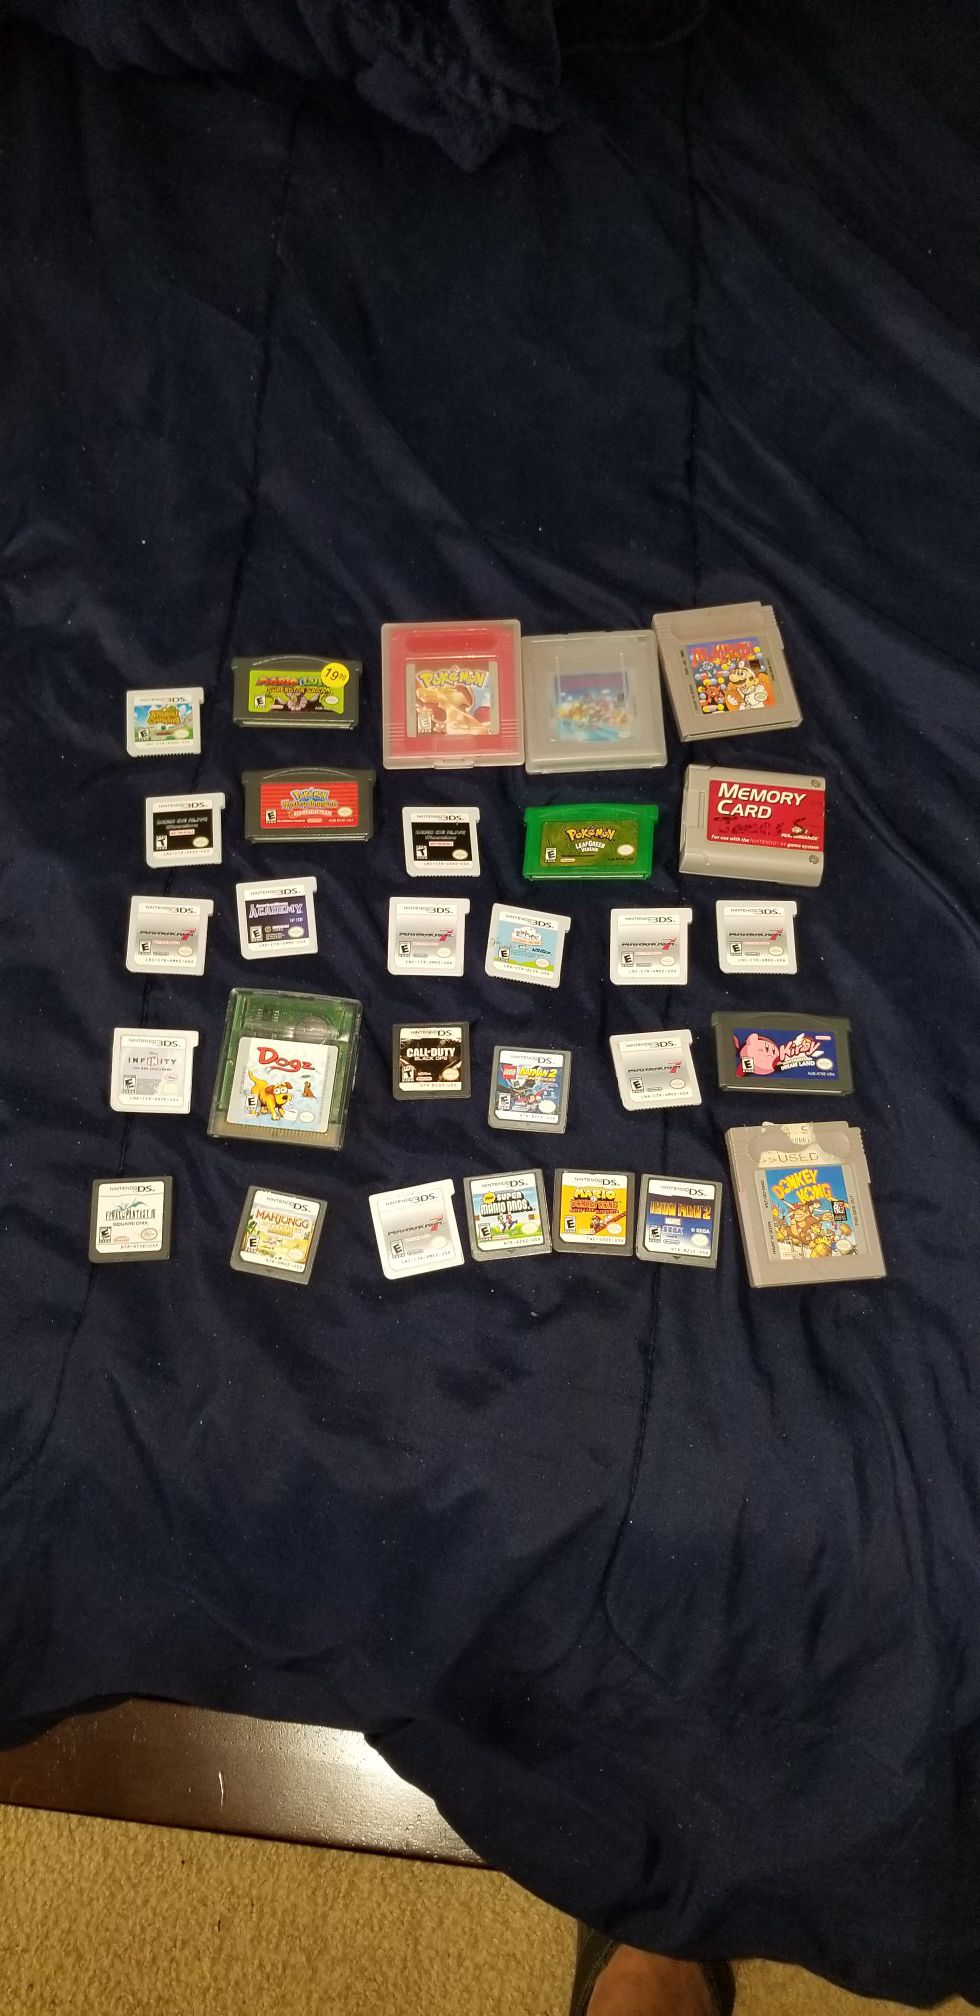 GameBoy games DS games 3D games Game Boy Advance games